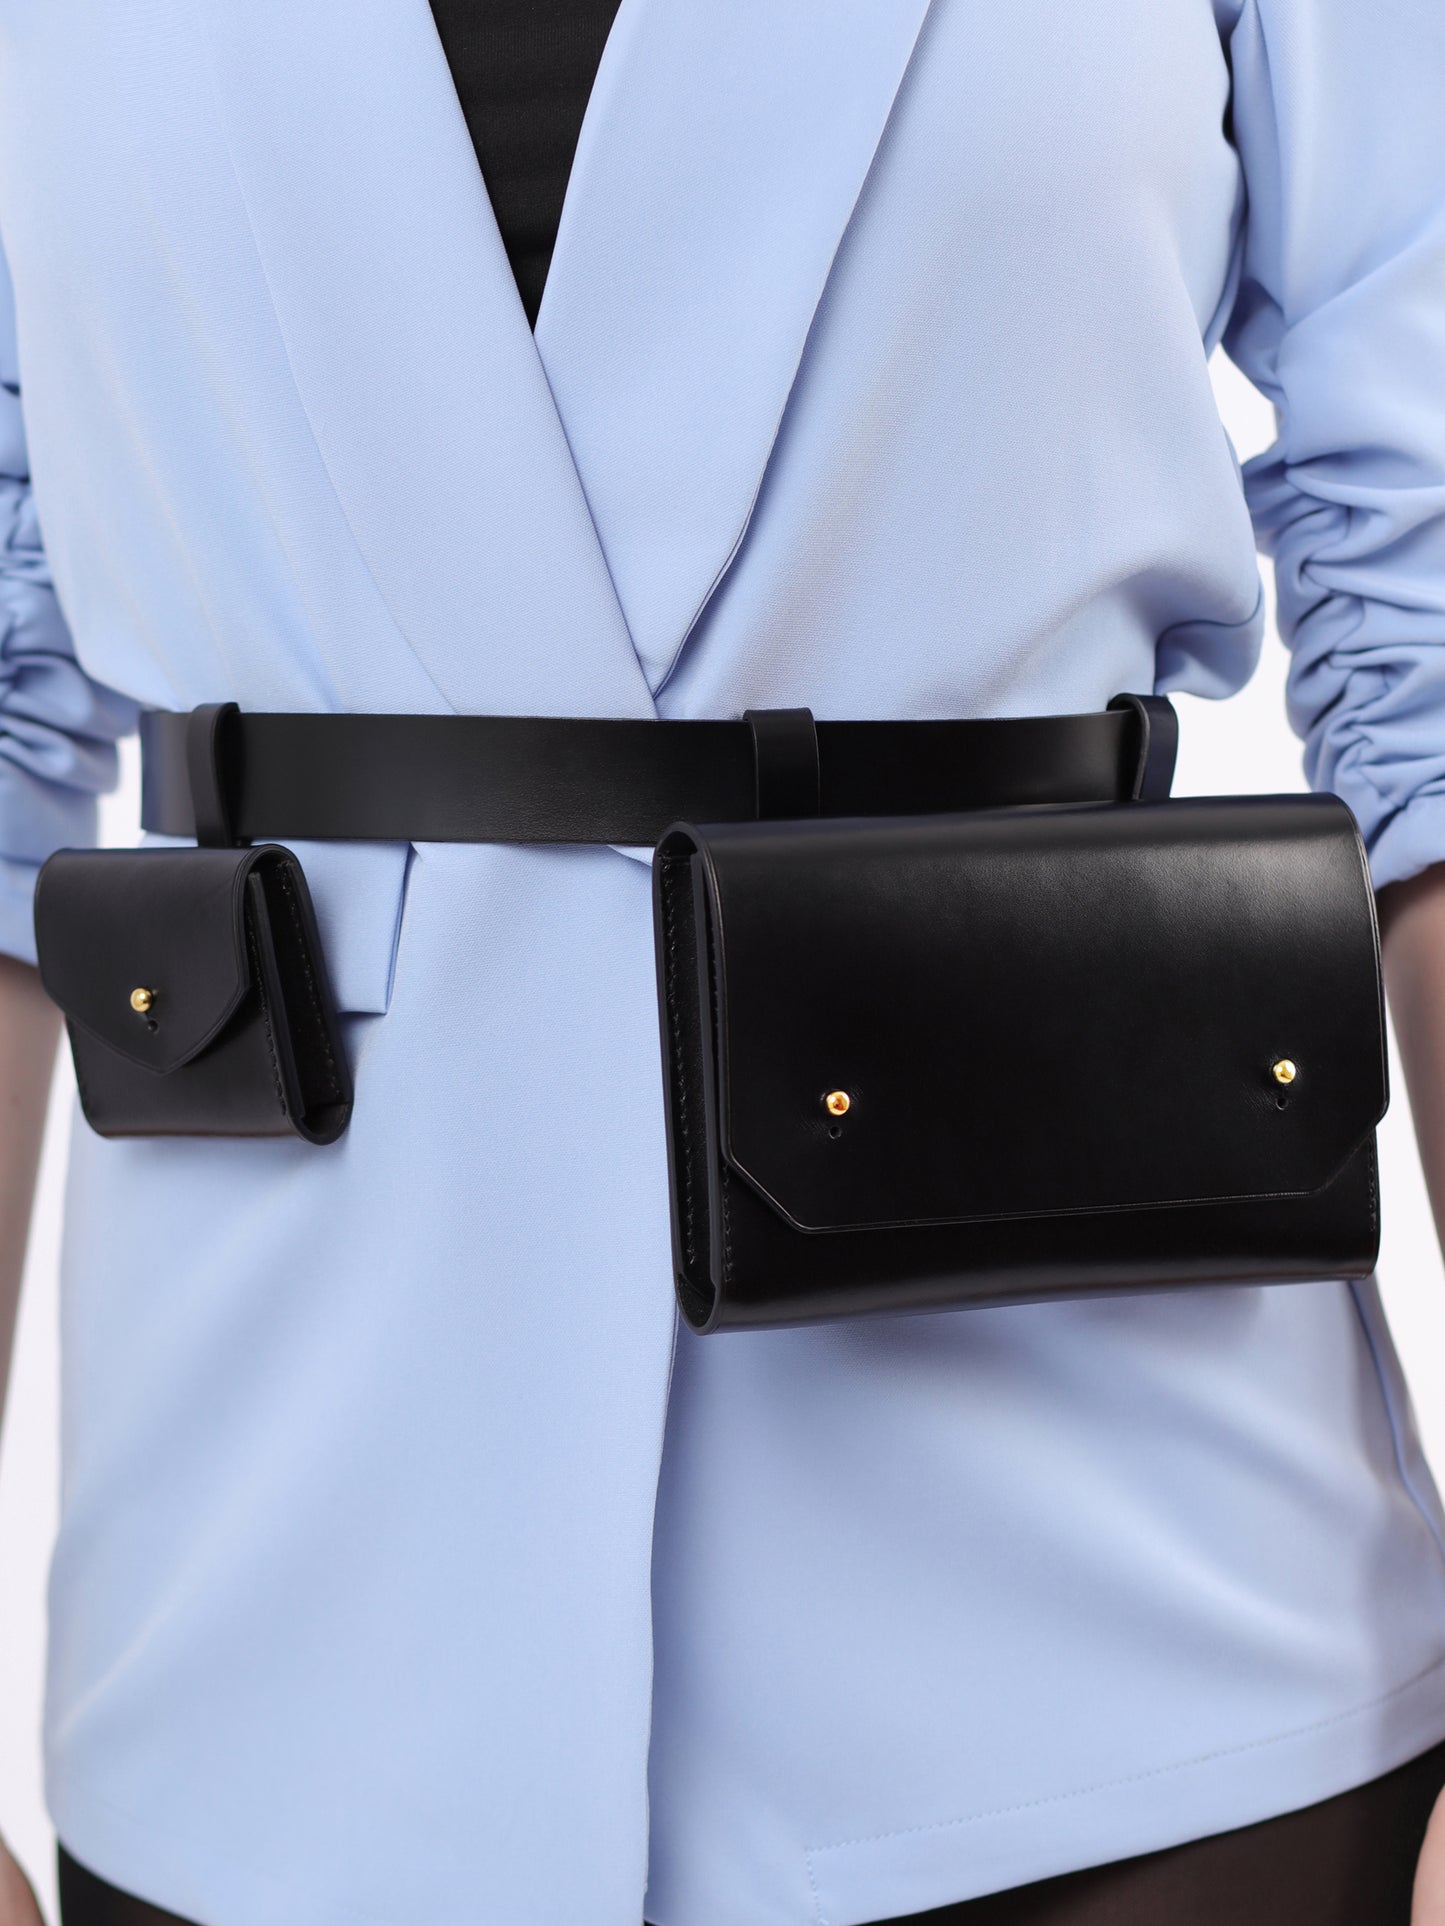 Detailed view of double belt bag.